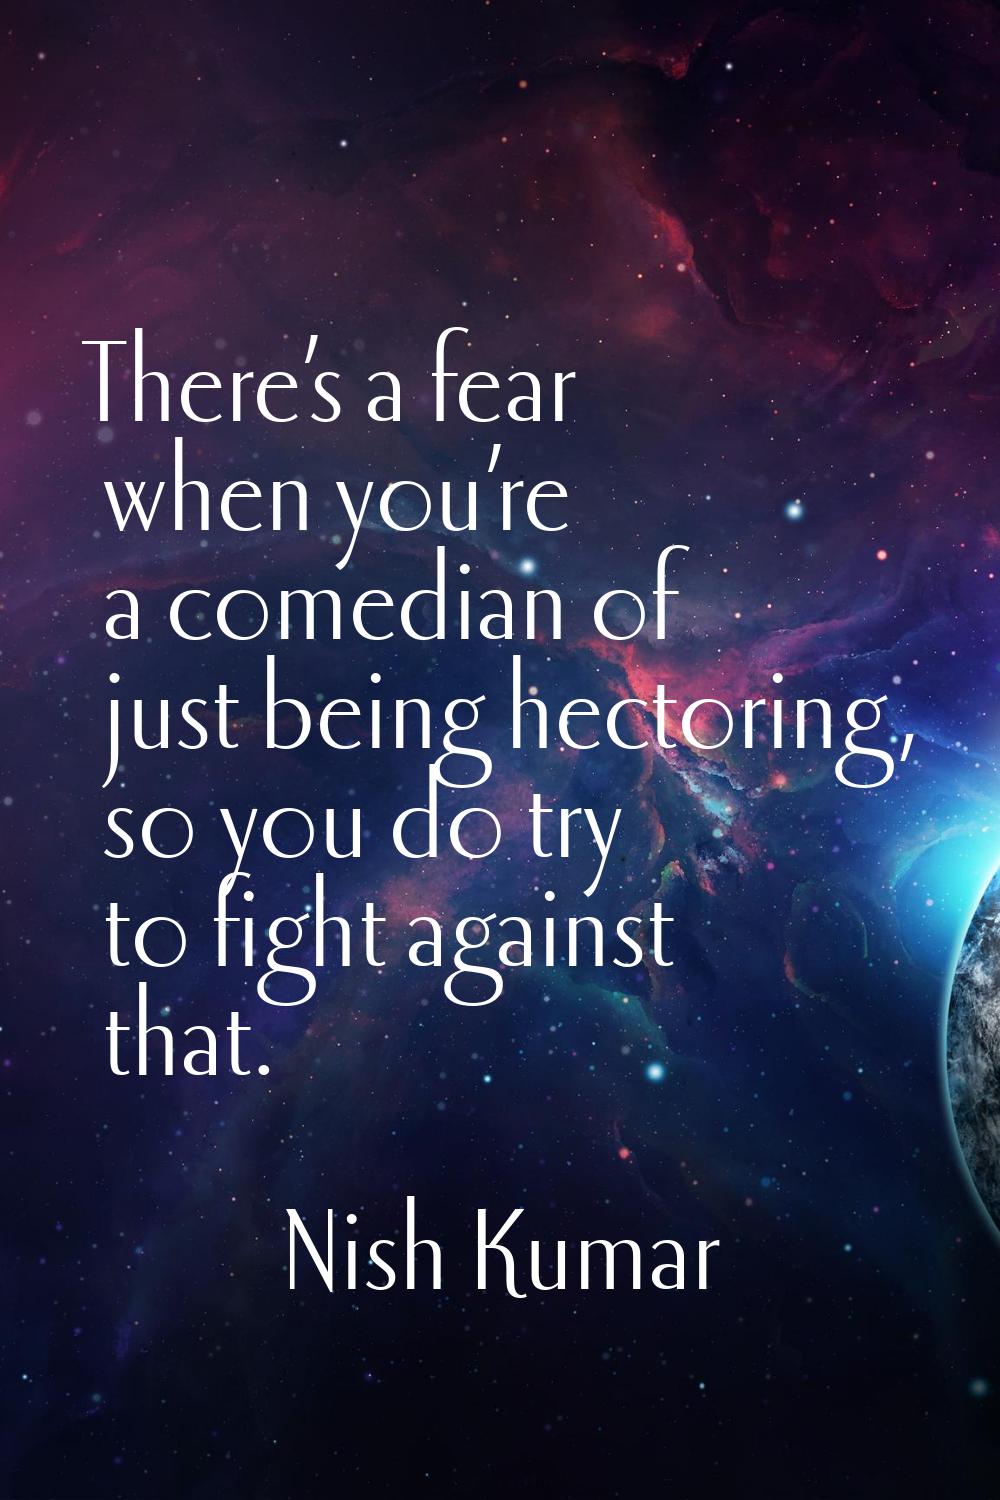 There’s a fear when you’re a comedian of just being hectoring, so you do try to fight against that.